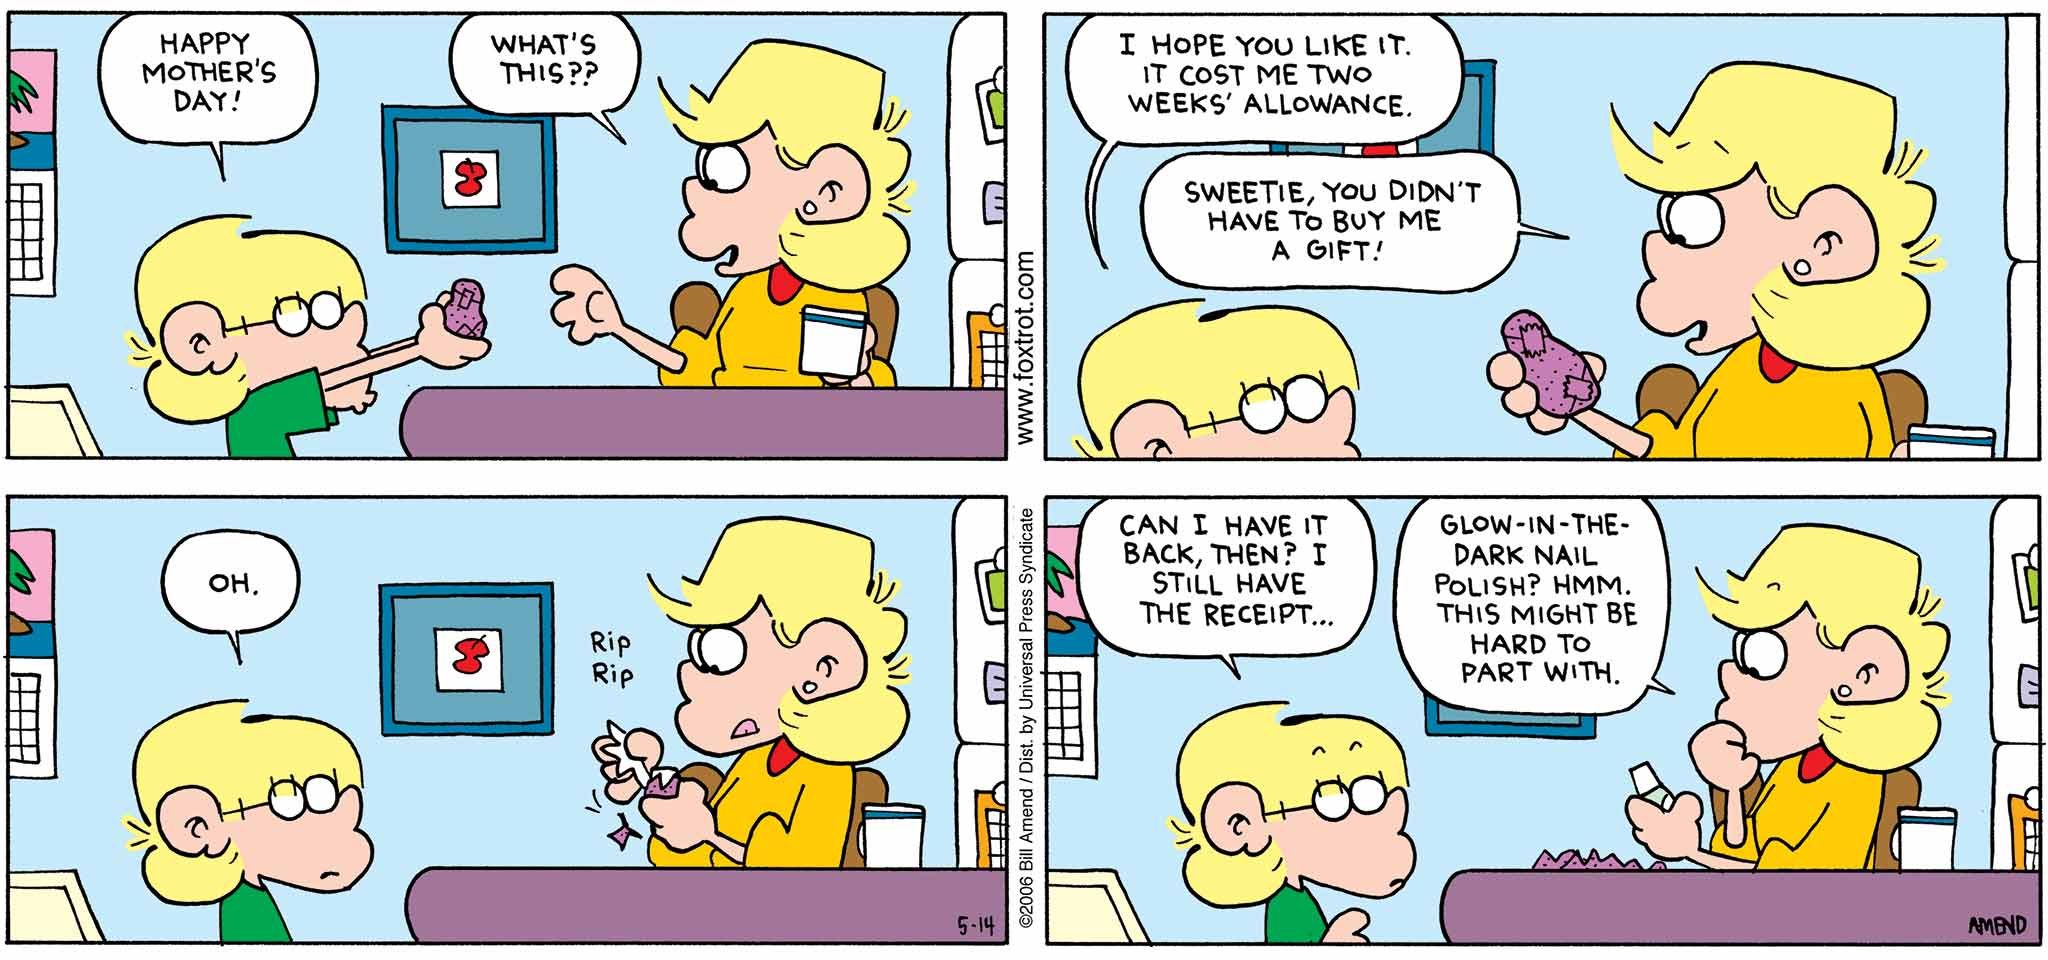 FoxTrot by Bill Amend - Mother's Day comic published May 14, 2006 - Jason: Happy Mother's Day! Andy: What's this?? Jason: I hope you like it. It cost me two weeks' allowance. Andy: Sweetie, you didn't have to buy me a gift! Jason: Oh. Can I have it back, then? I still have the receipt... Andy: Glow-in-the-dark nail polish? Hmm. This might be hard to part with.